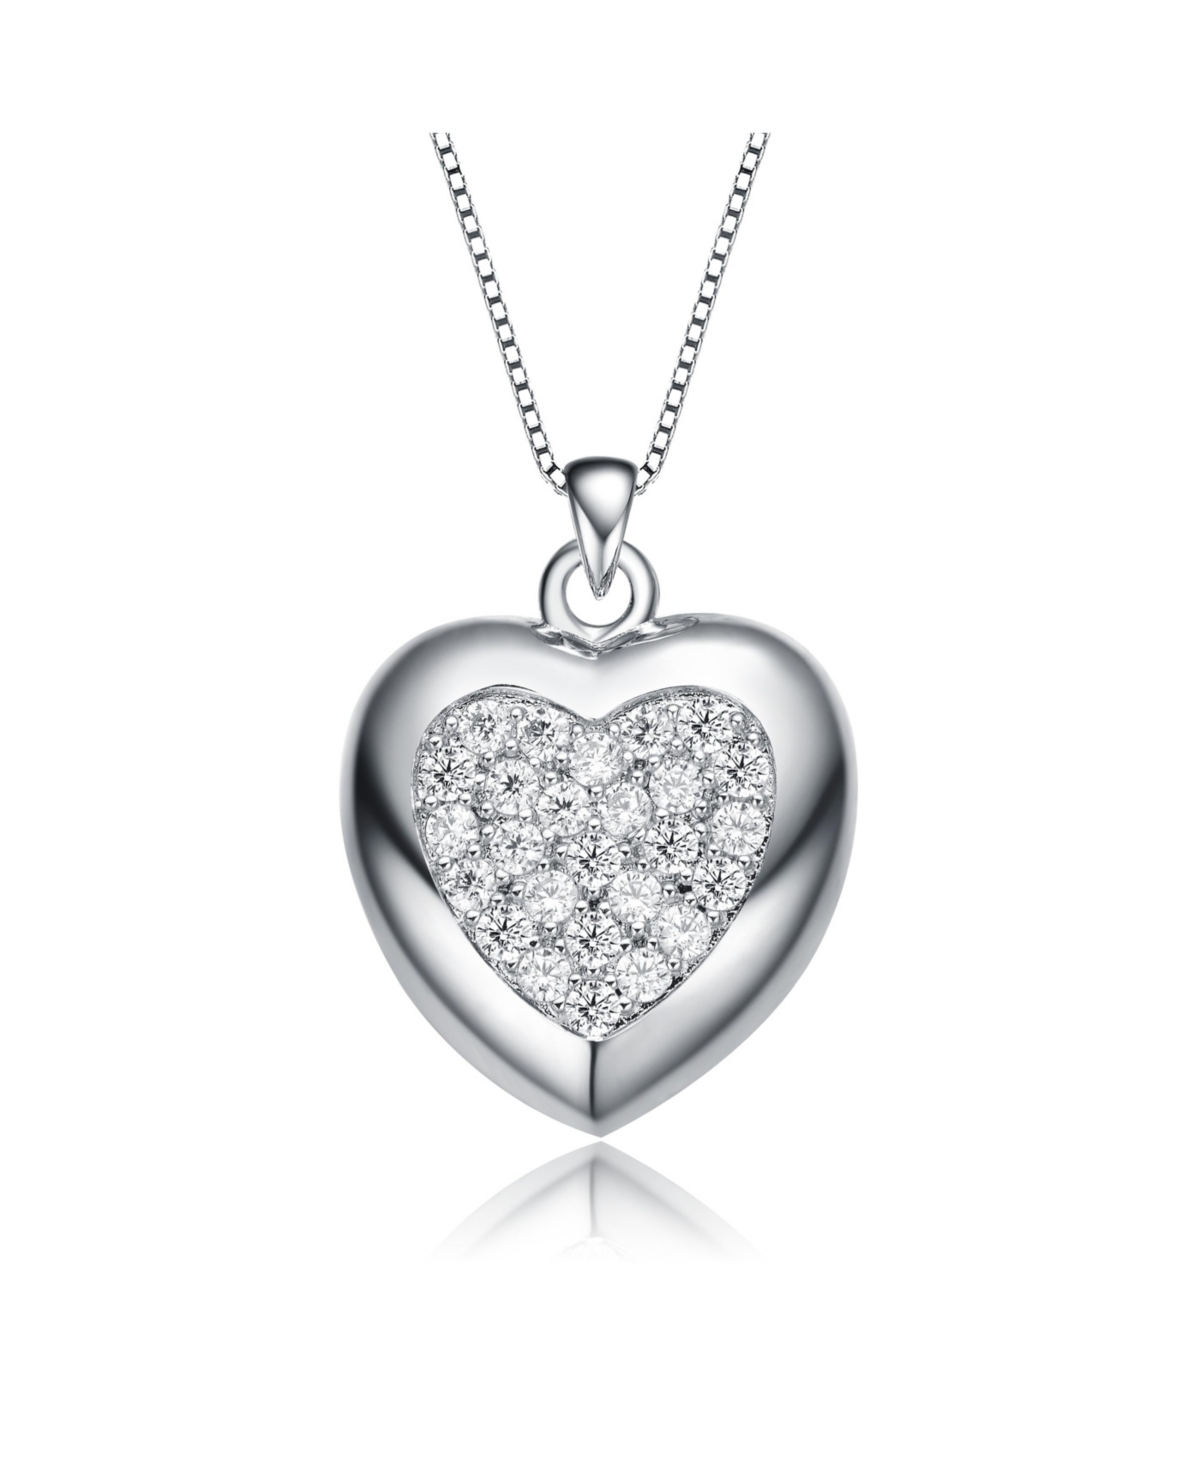 Fashionable and elegant White Gold Plated Heart Pendant Necklace - Silver